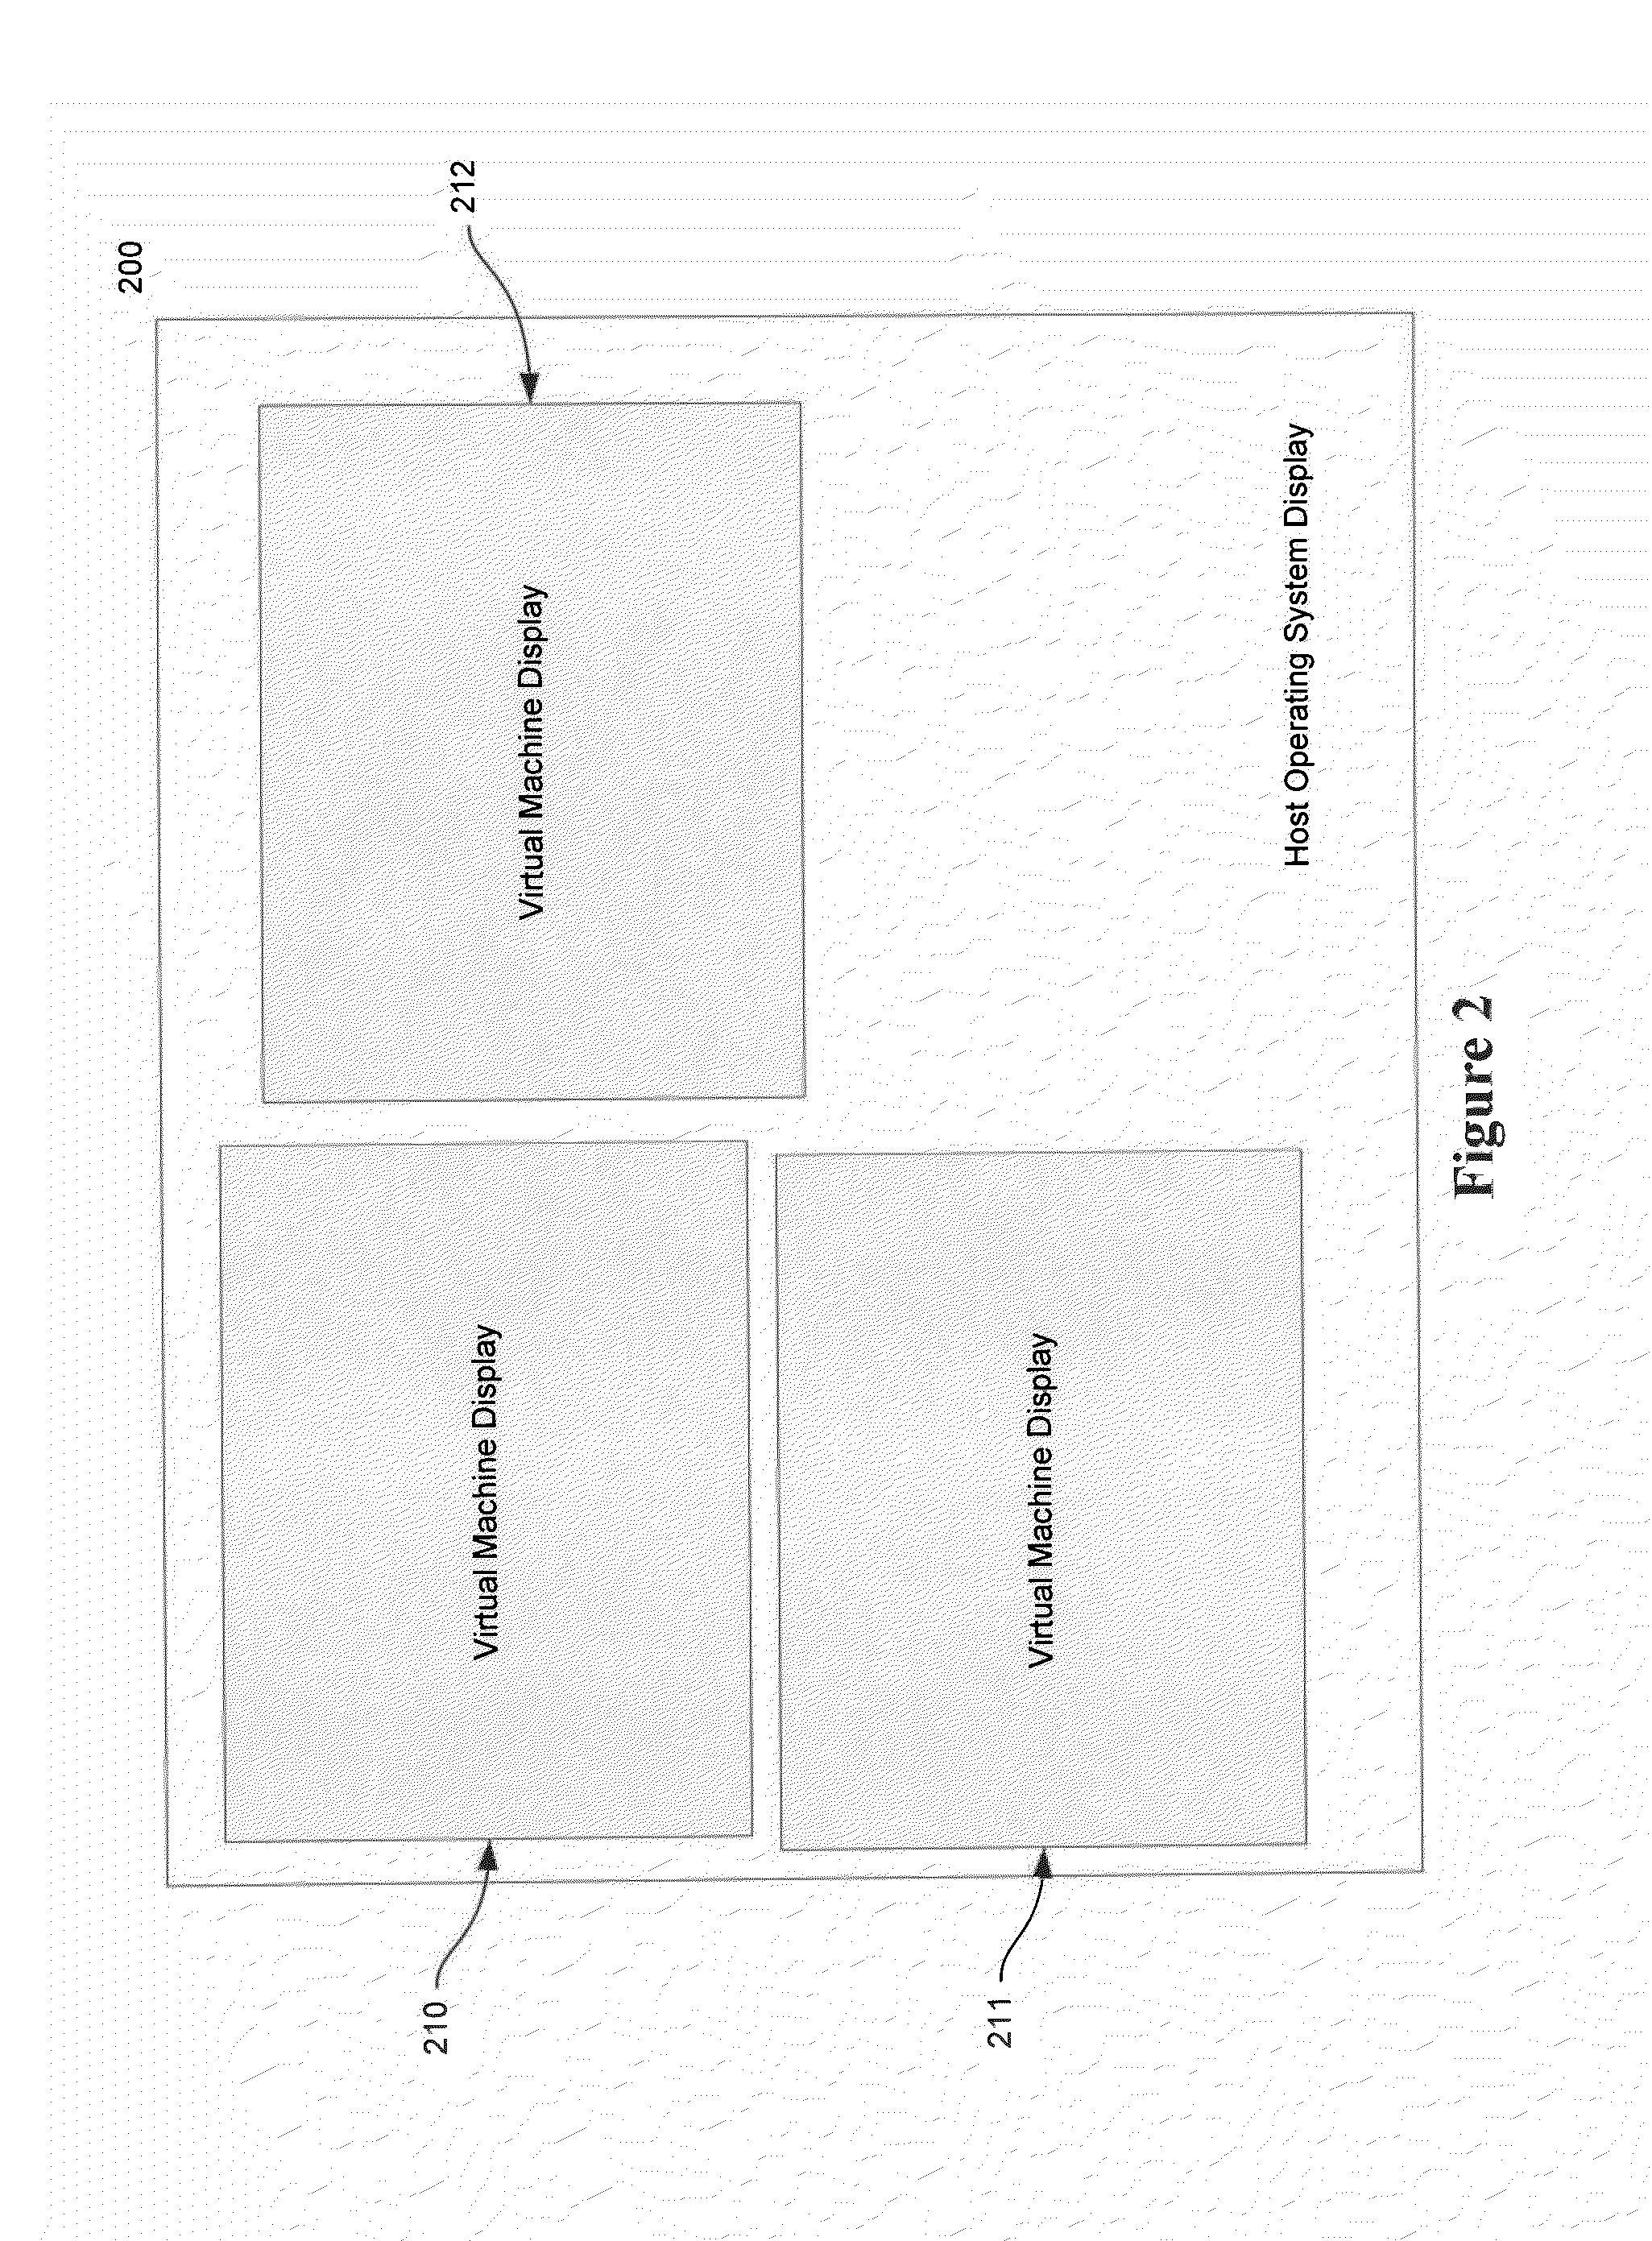 GPU Display Abstraction and Emulation in a Virtualization System